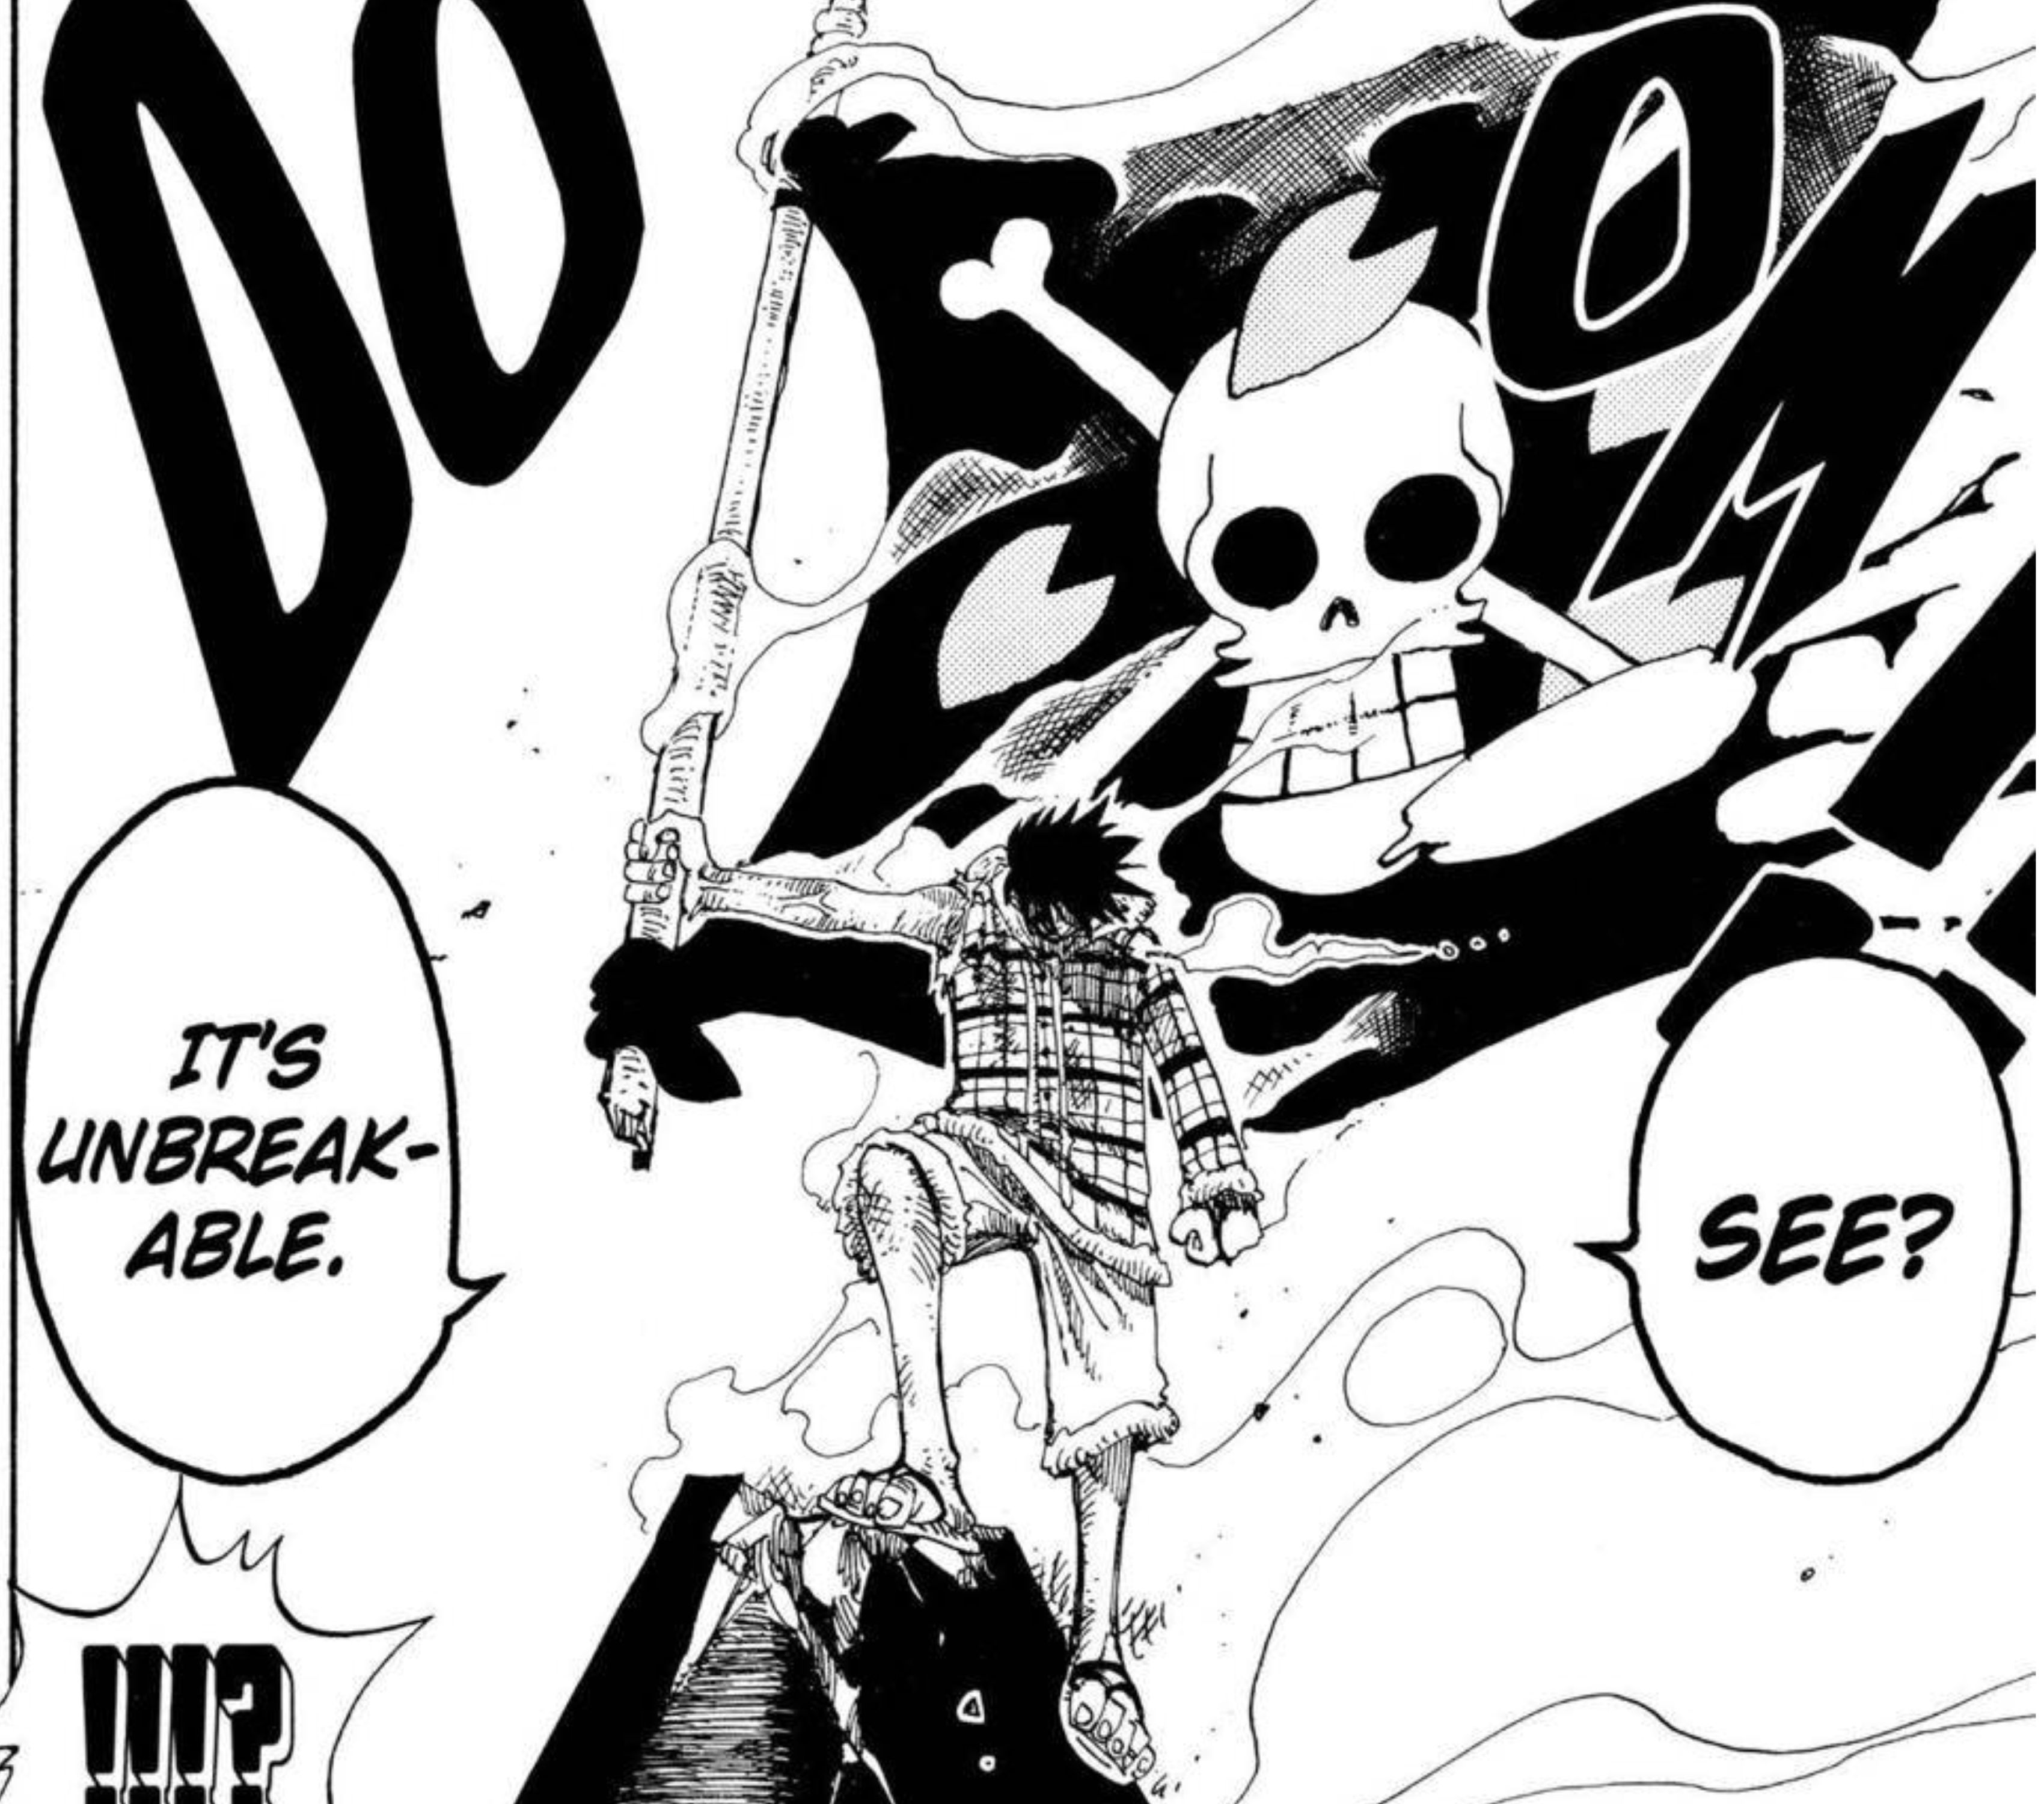 Monkey D. Luffy protects Dr. Hiriluk's flag from Wapol during the Drum Island Arc